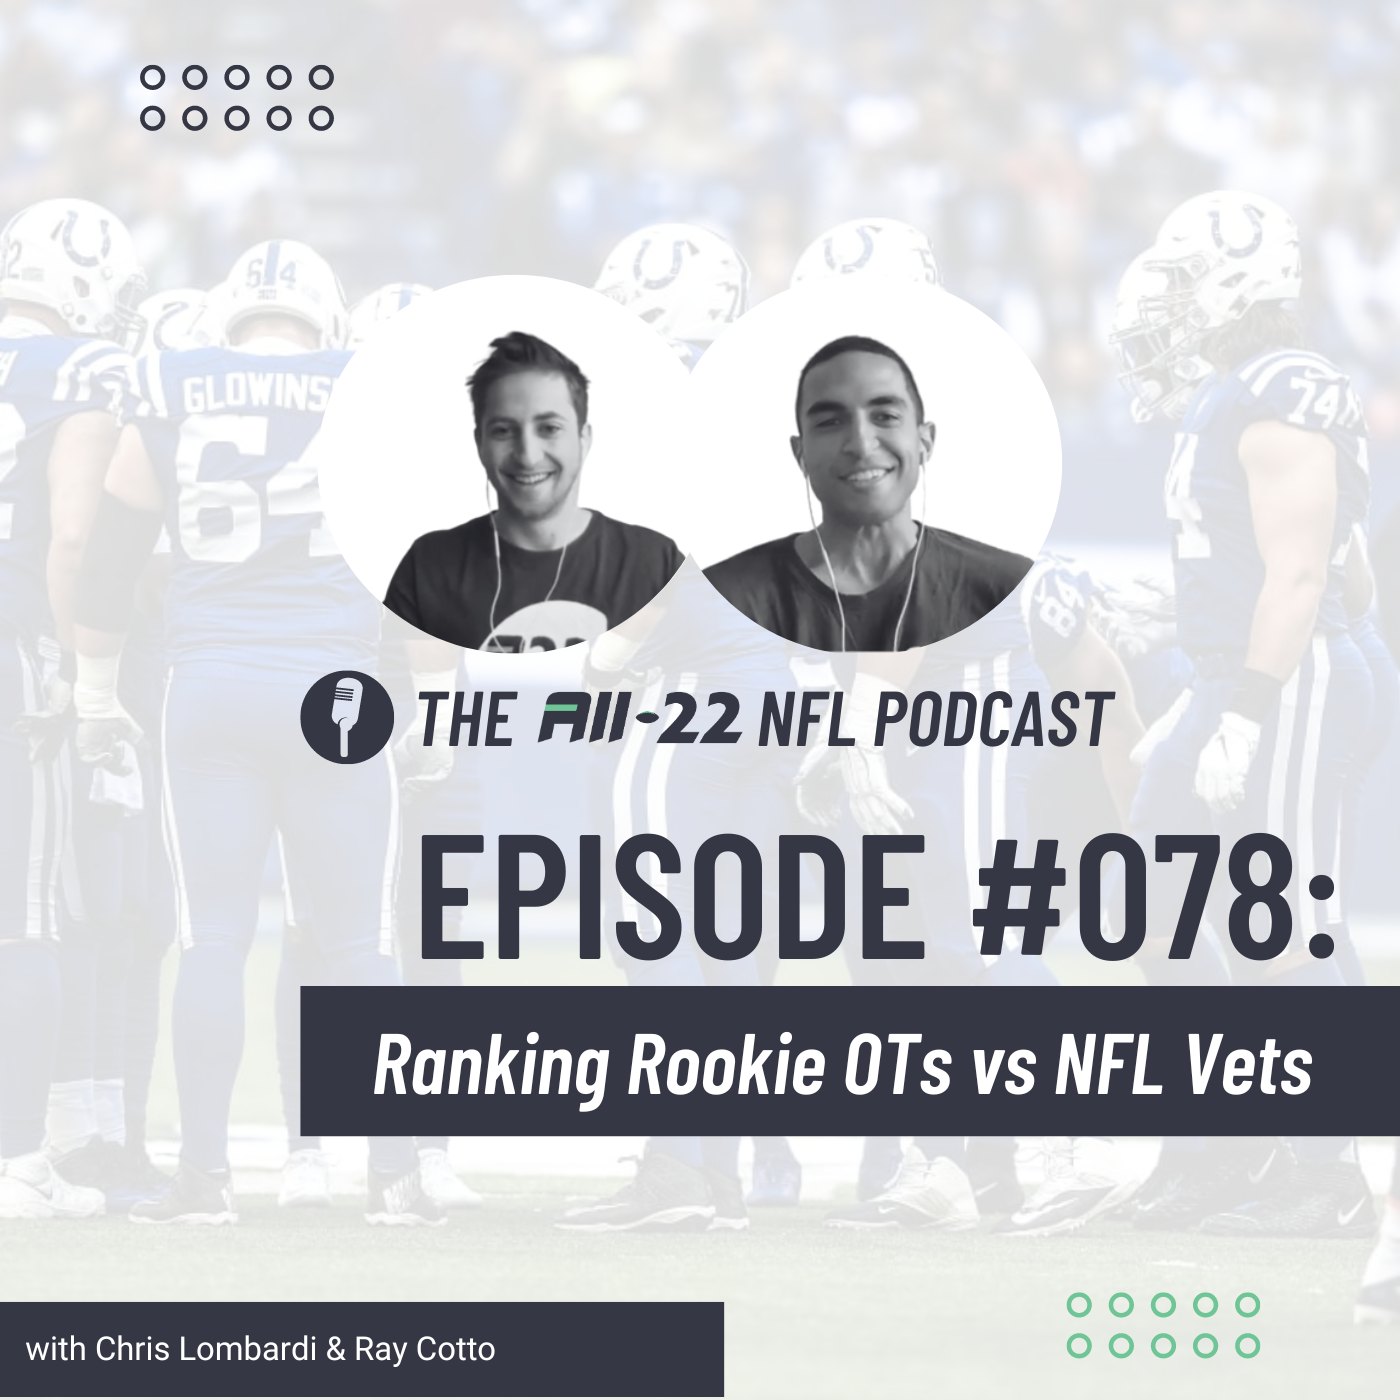 The All-22 NFL Podcast #078: Ranking Rookie Offensive Tackles vs NFL Vets